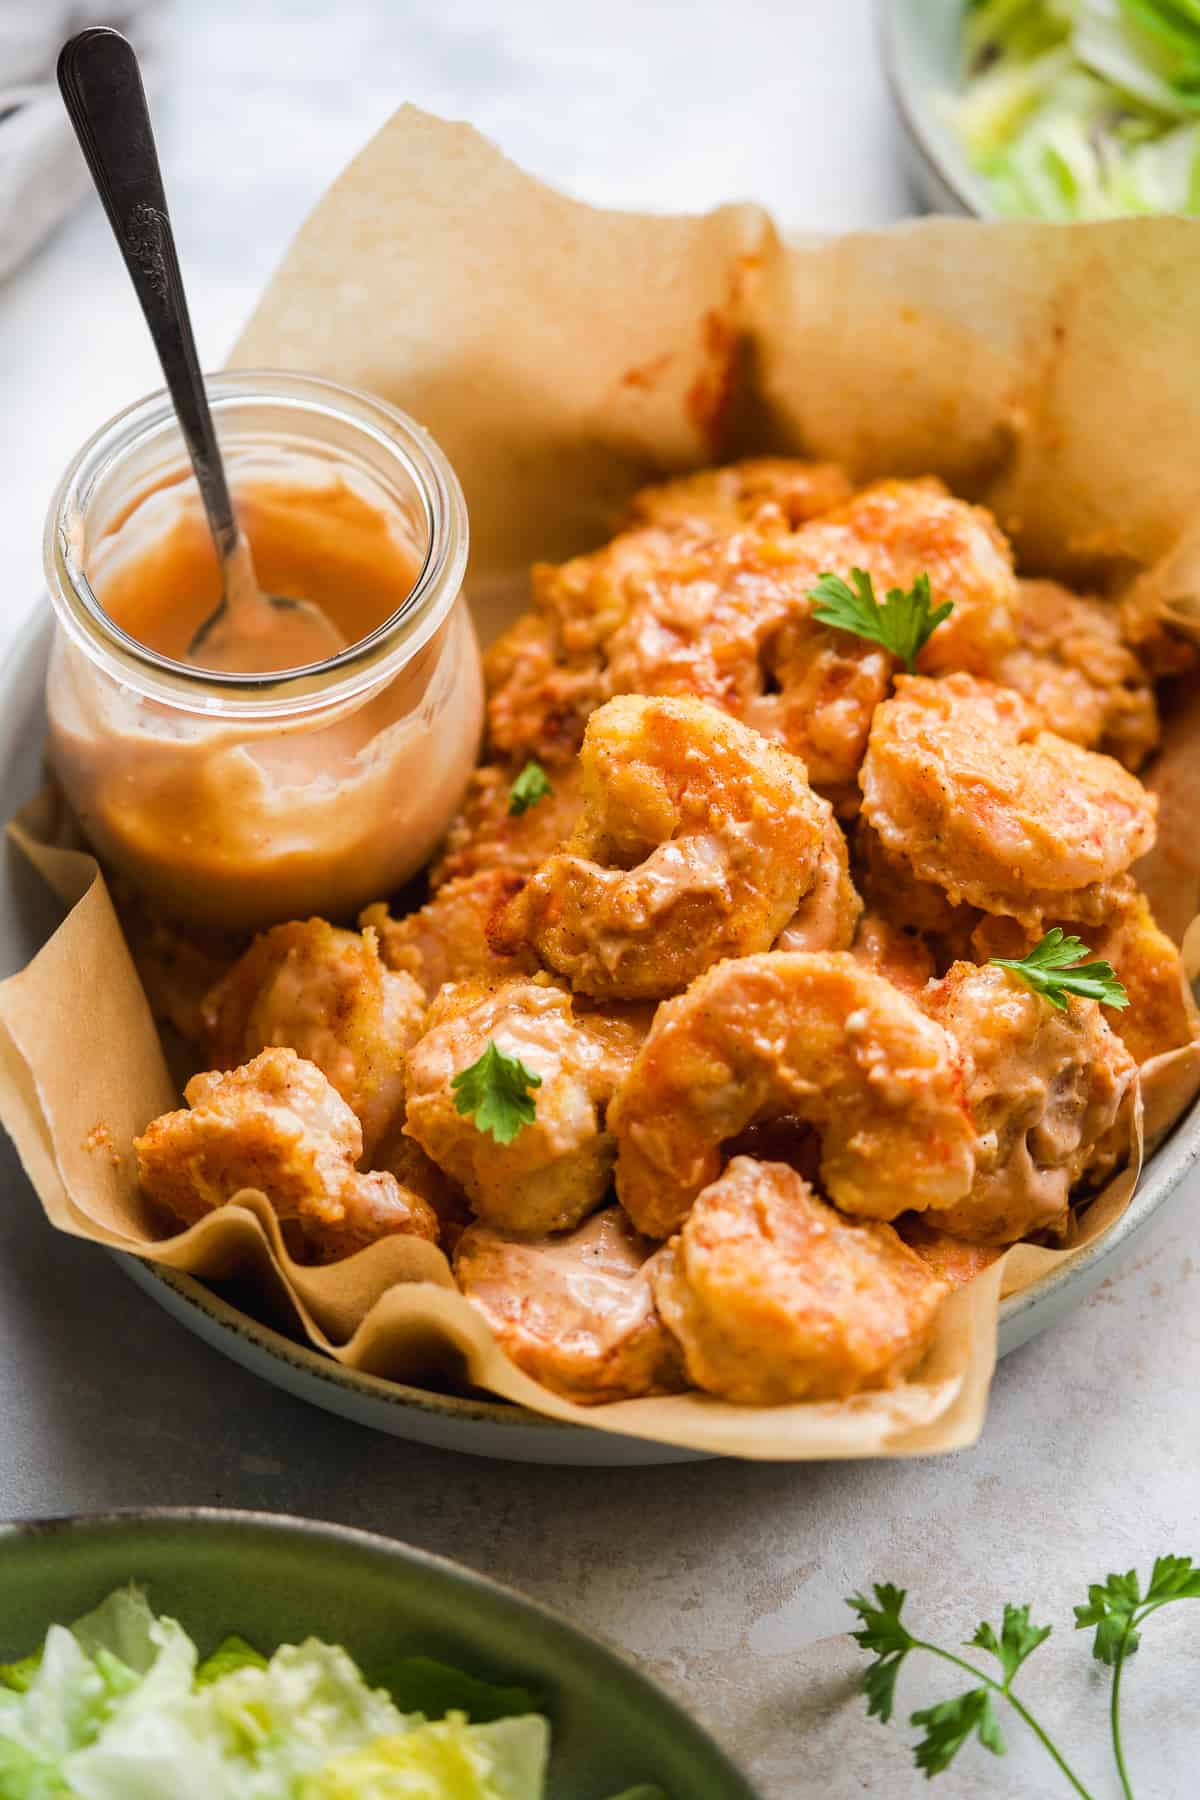 Orange shrimp tossed in sauce in a basket with brown paper.